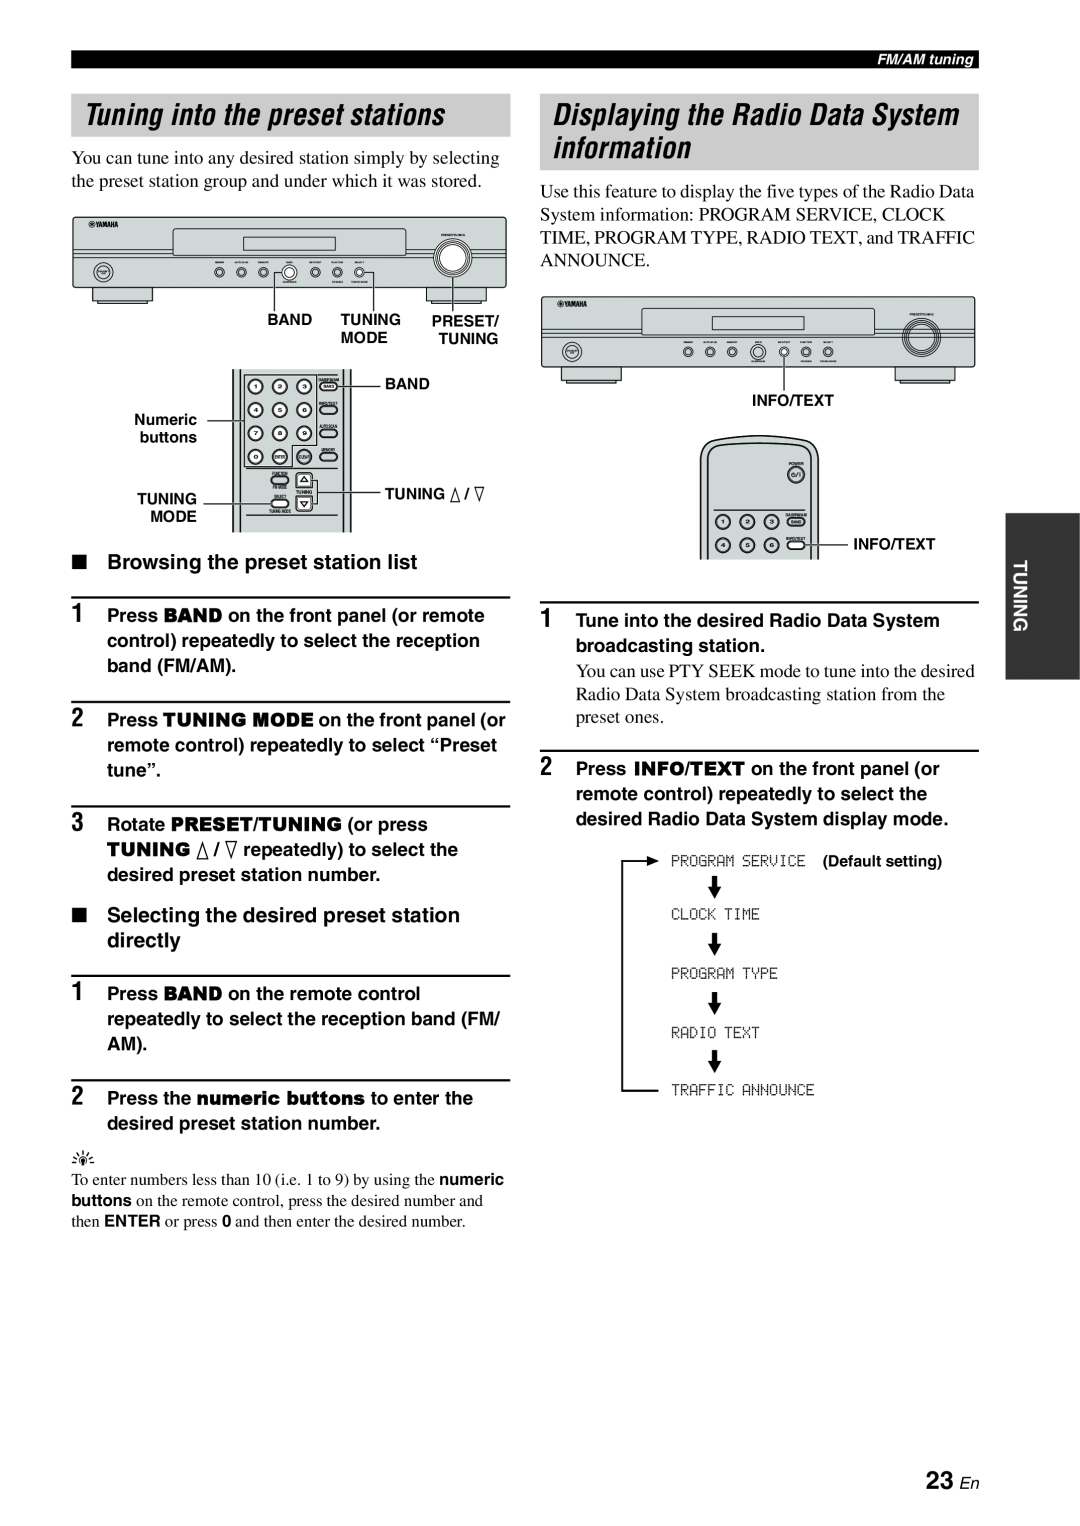 Yamaha TX-761DAB owner manual Tuning into the preset stations, Displaying the Radio Data System information, 23 En 